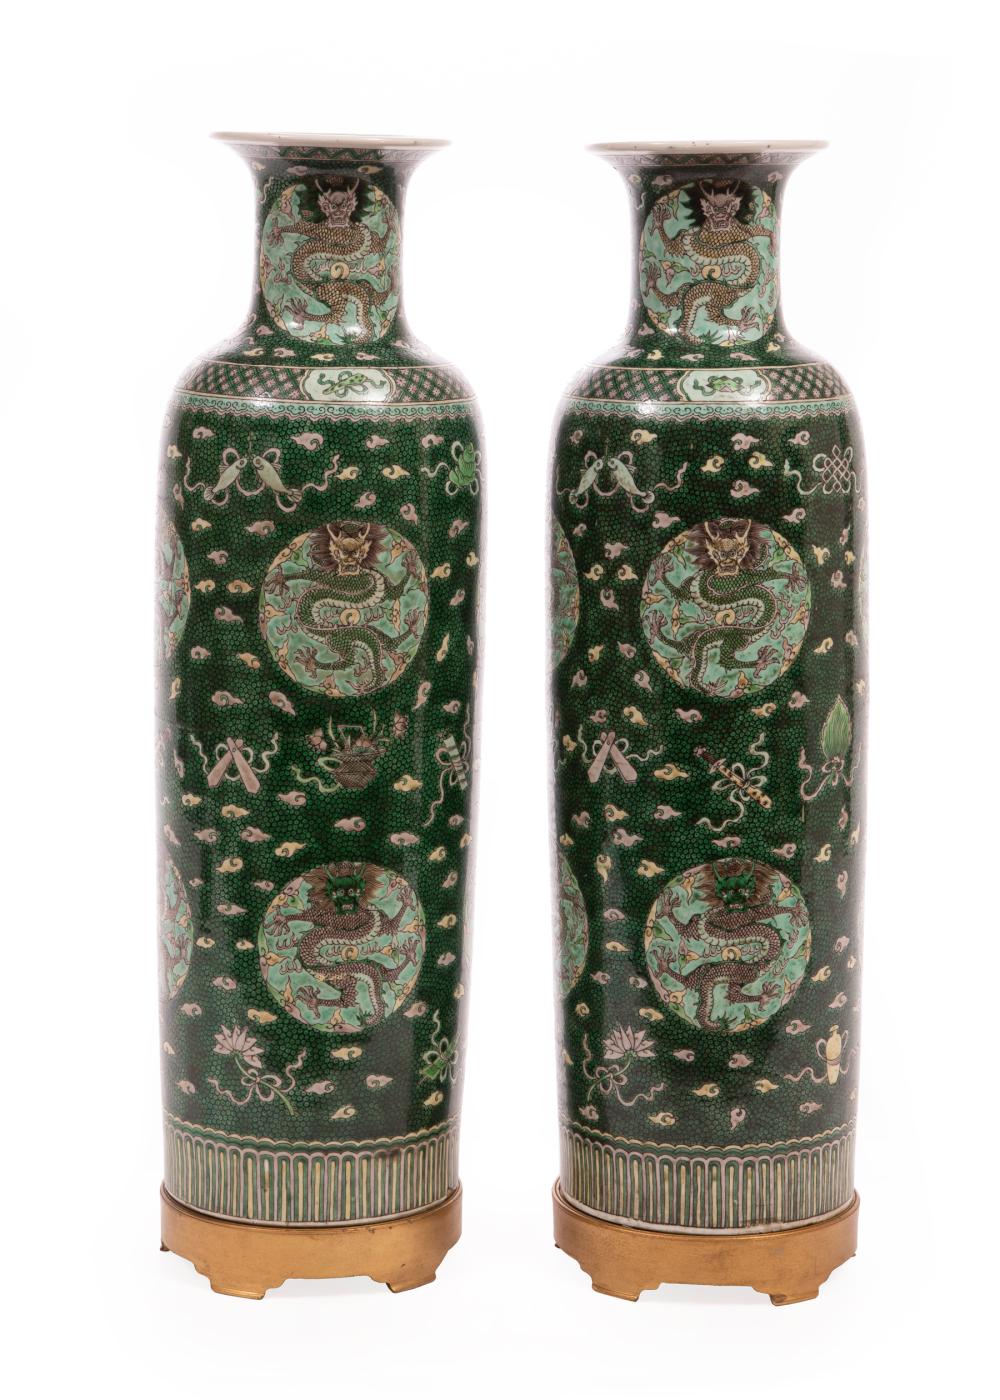 PAIR OF CHINESE PORCELAIN SLEEVE 2e3067